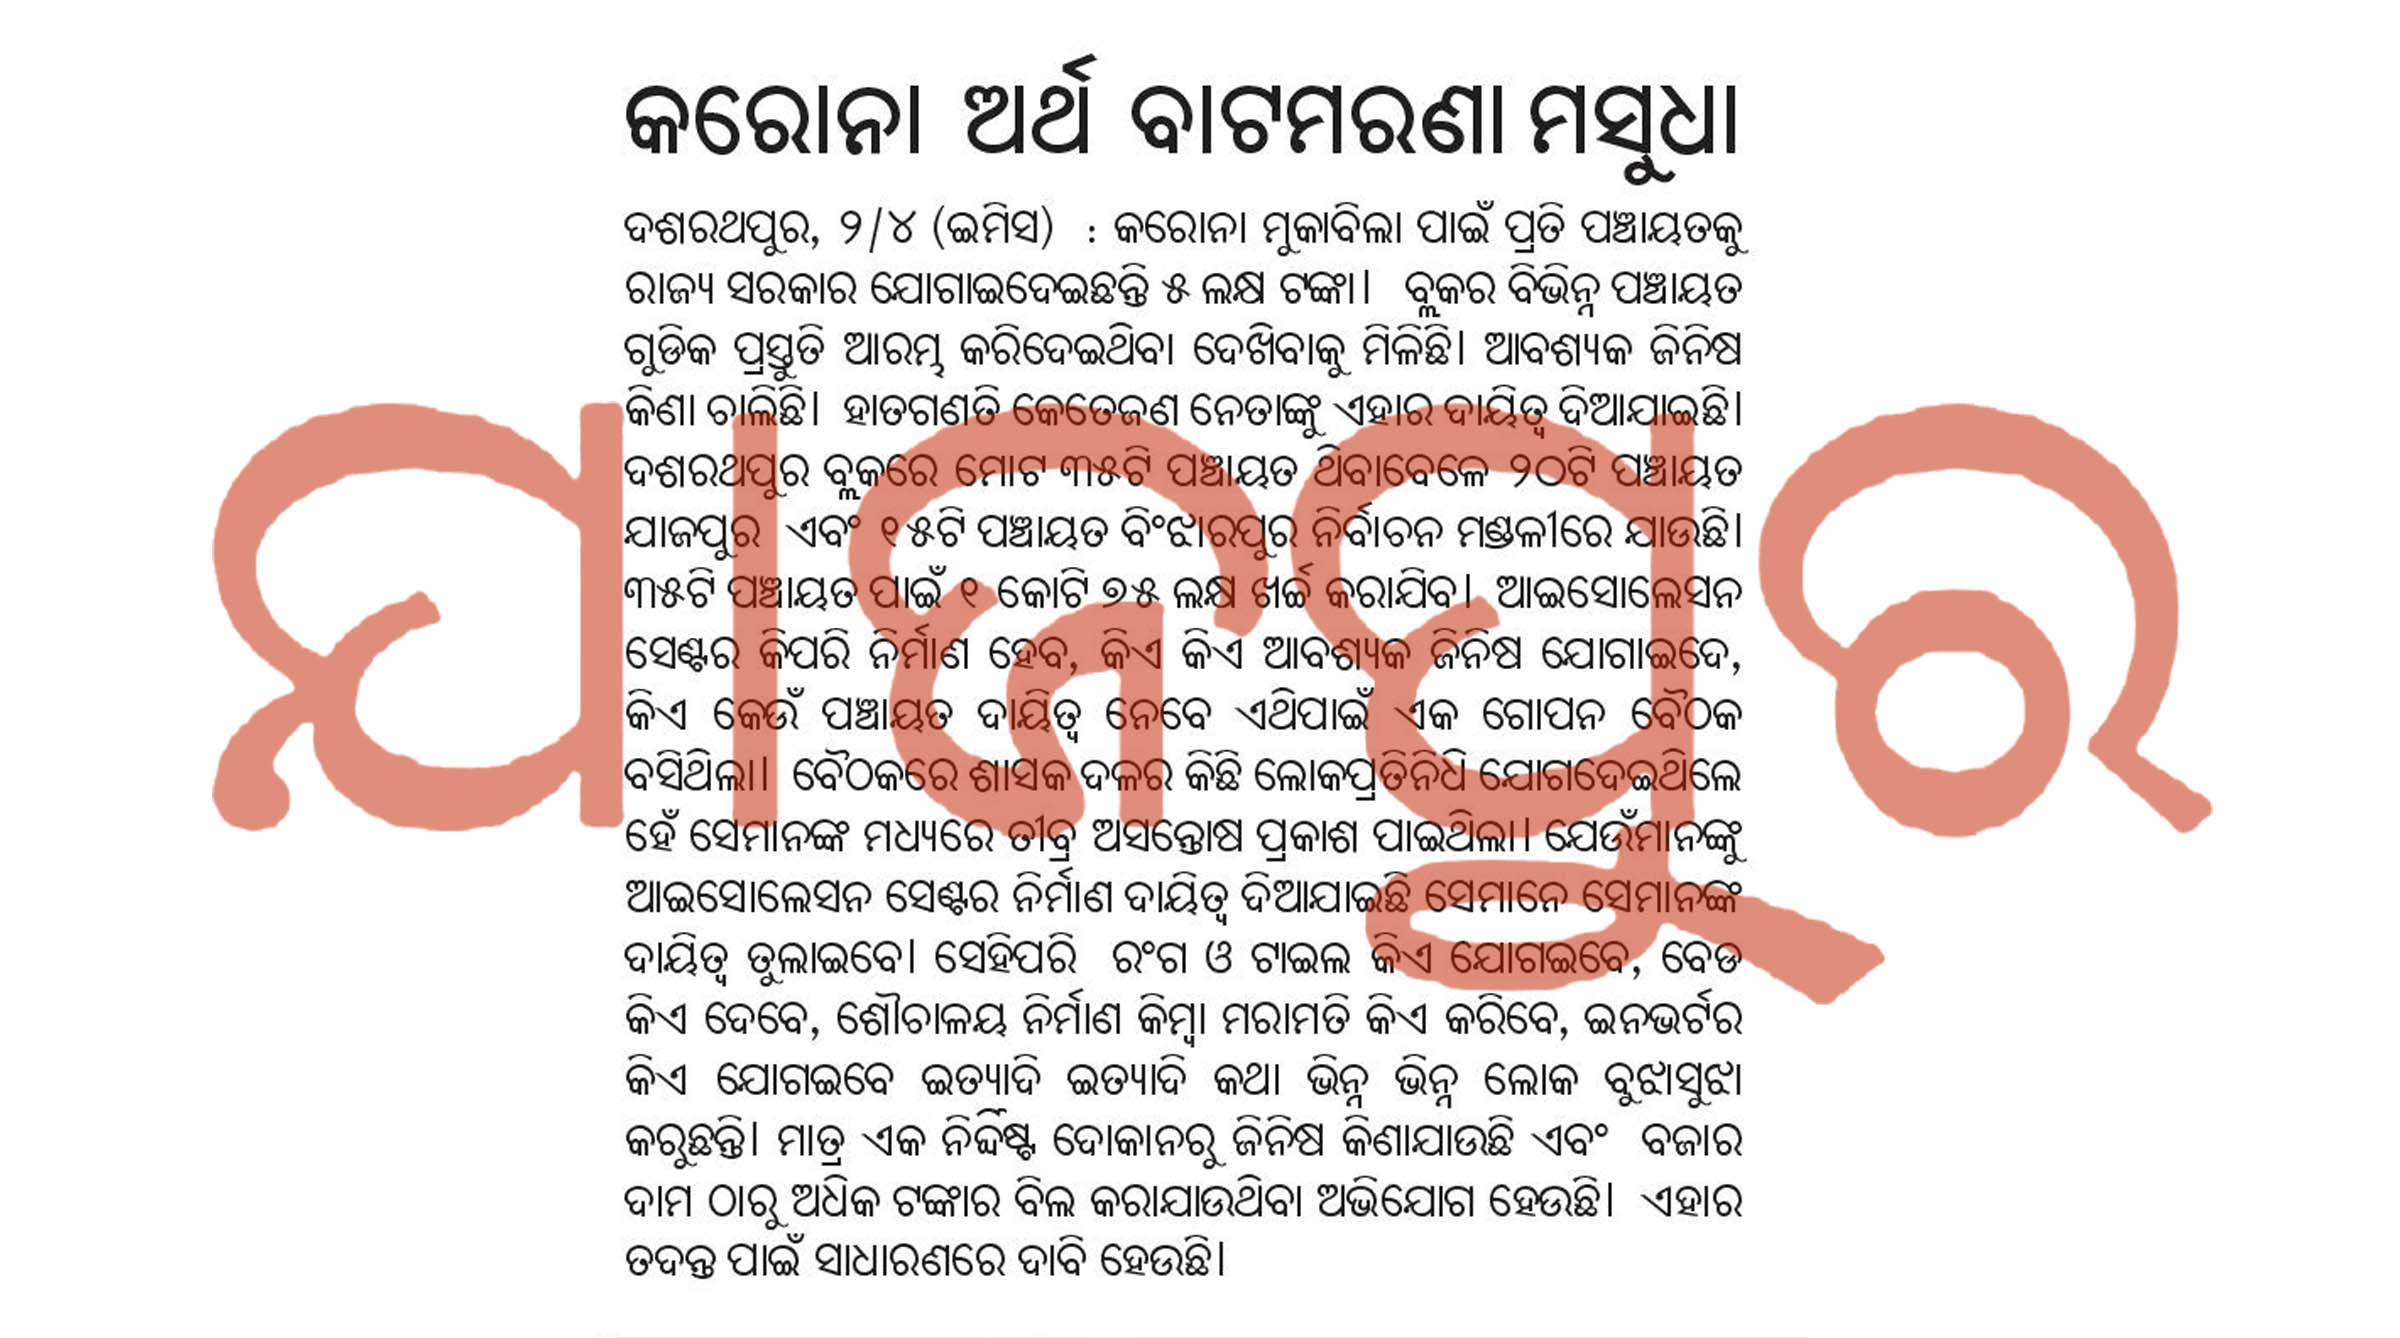 Jajpur collector orders police action aganist fake news